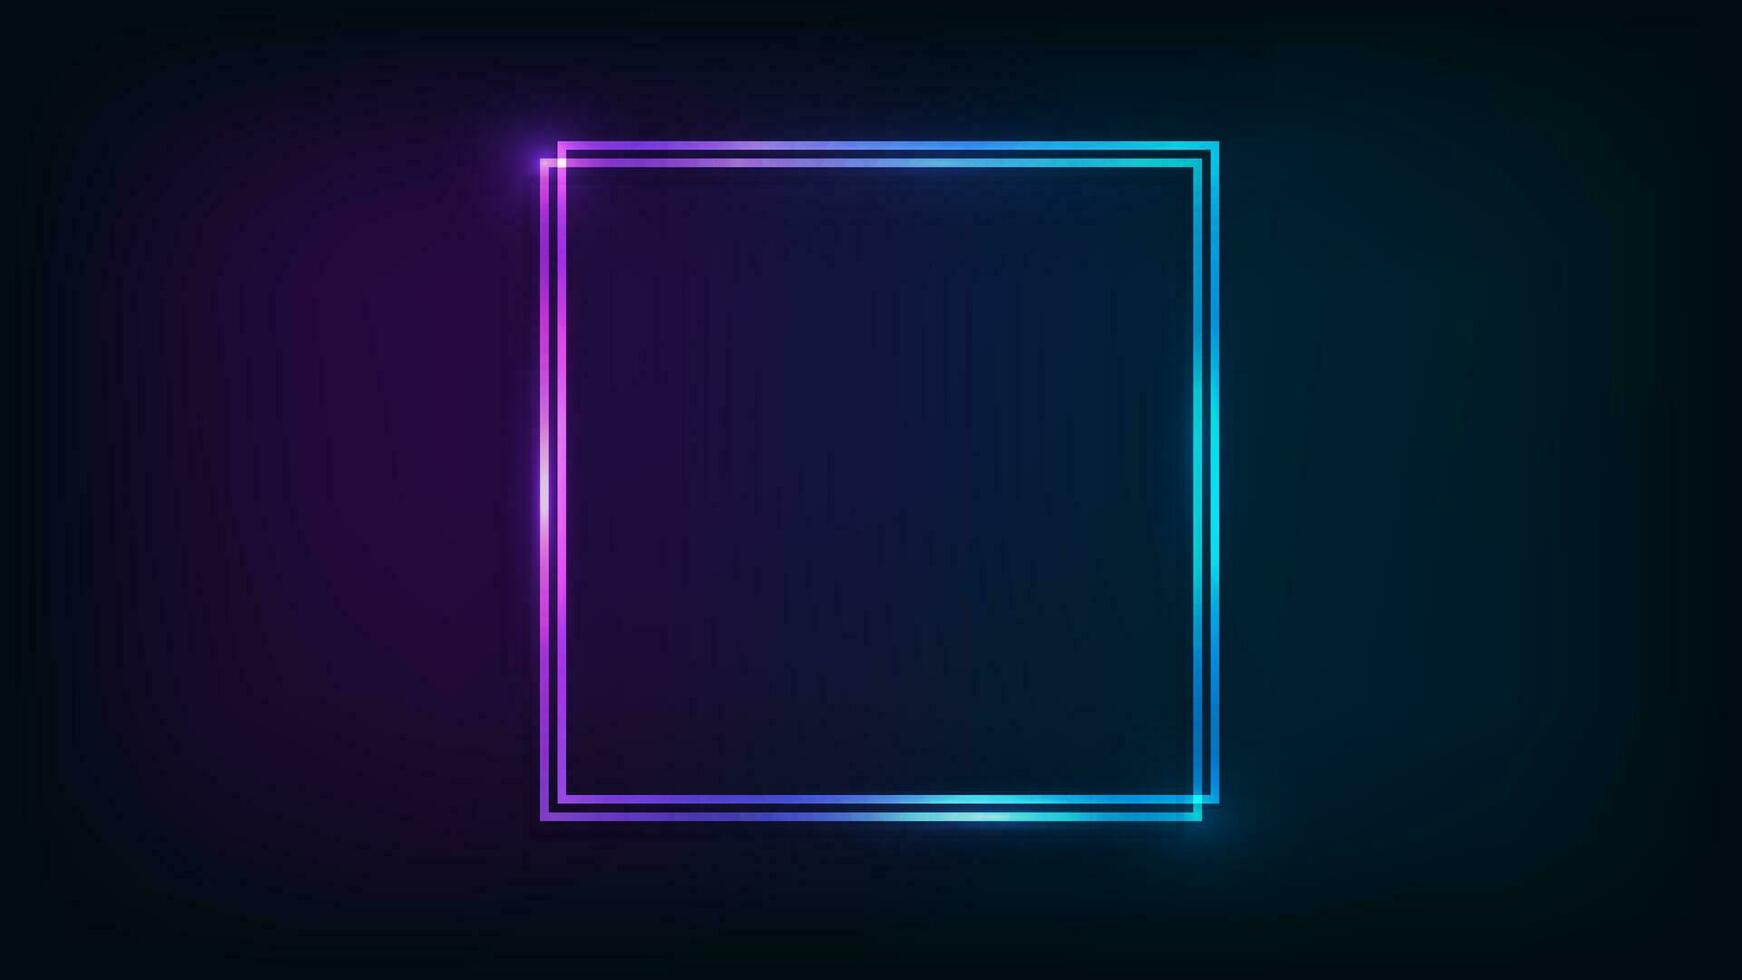 Neon double square frame with shining effects on dark background. Empty glowing techno backdrop. Vector illustration.